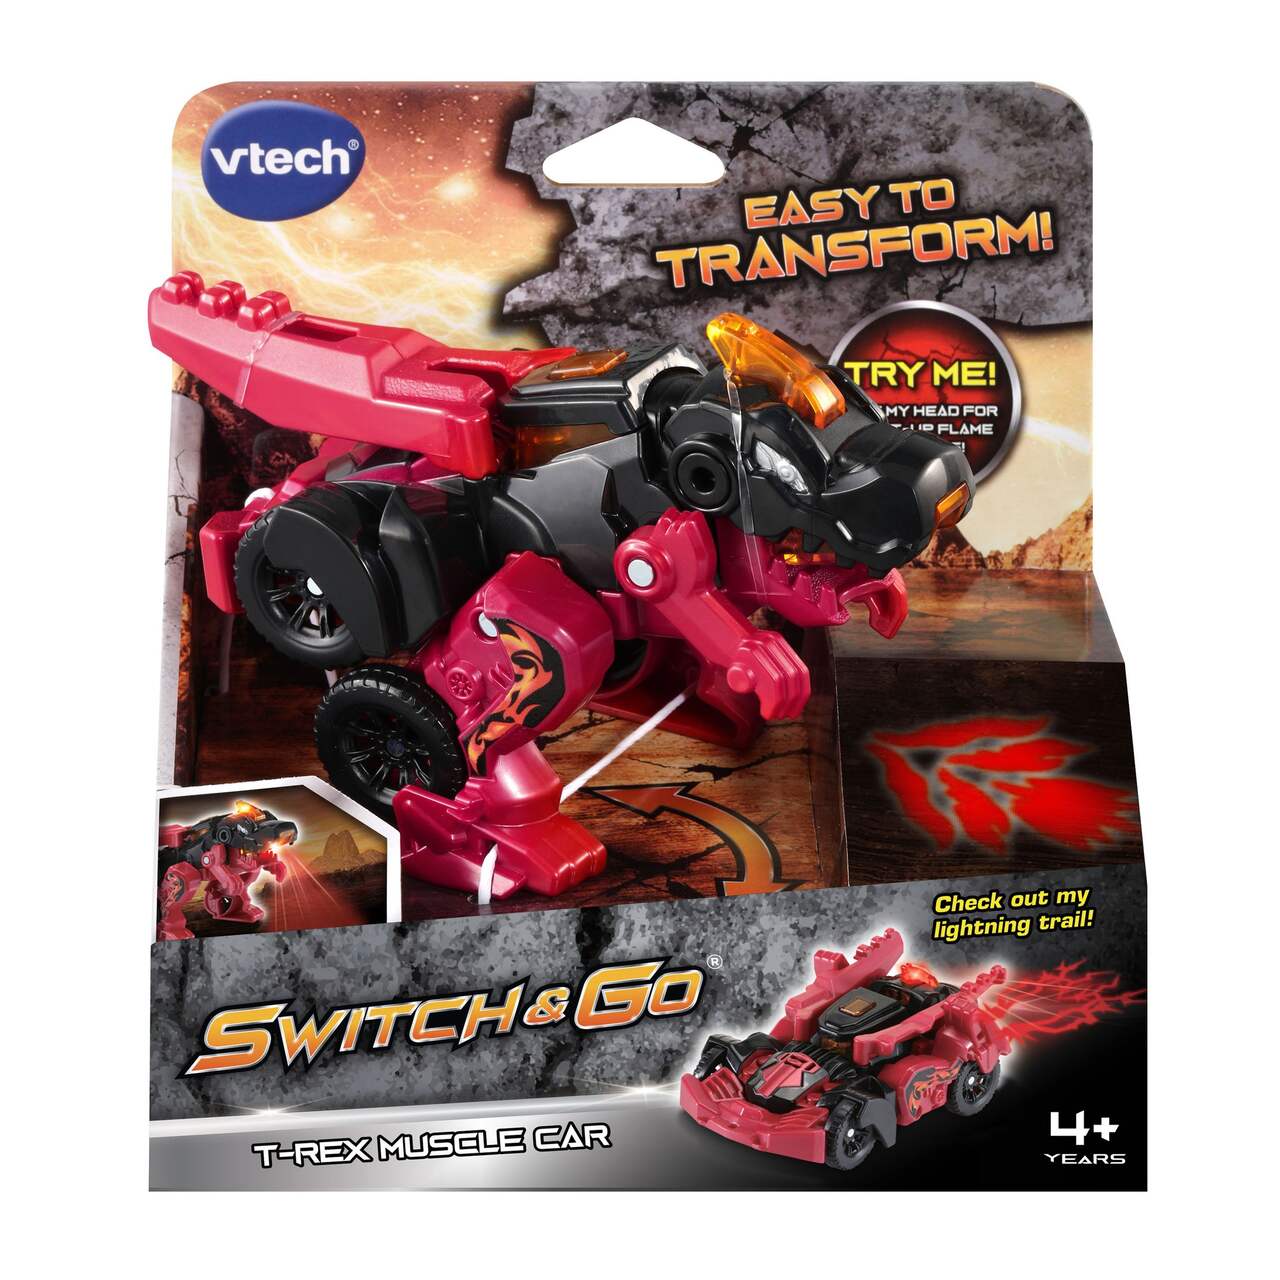 https://media-www.canadiantire.ca/product/seasonal-gardening/toys/preschool-toys-activities/0509911/vtech-switch-and-go-t-rex-muscle-car-english-2c276348-b40e-4c03-8cc5-3855f78a8dff-jpgrendition.jpg?imdensity=1&imwidth=640&impolicy=mZoom